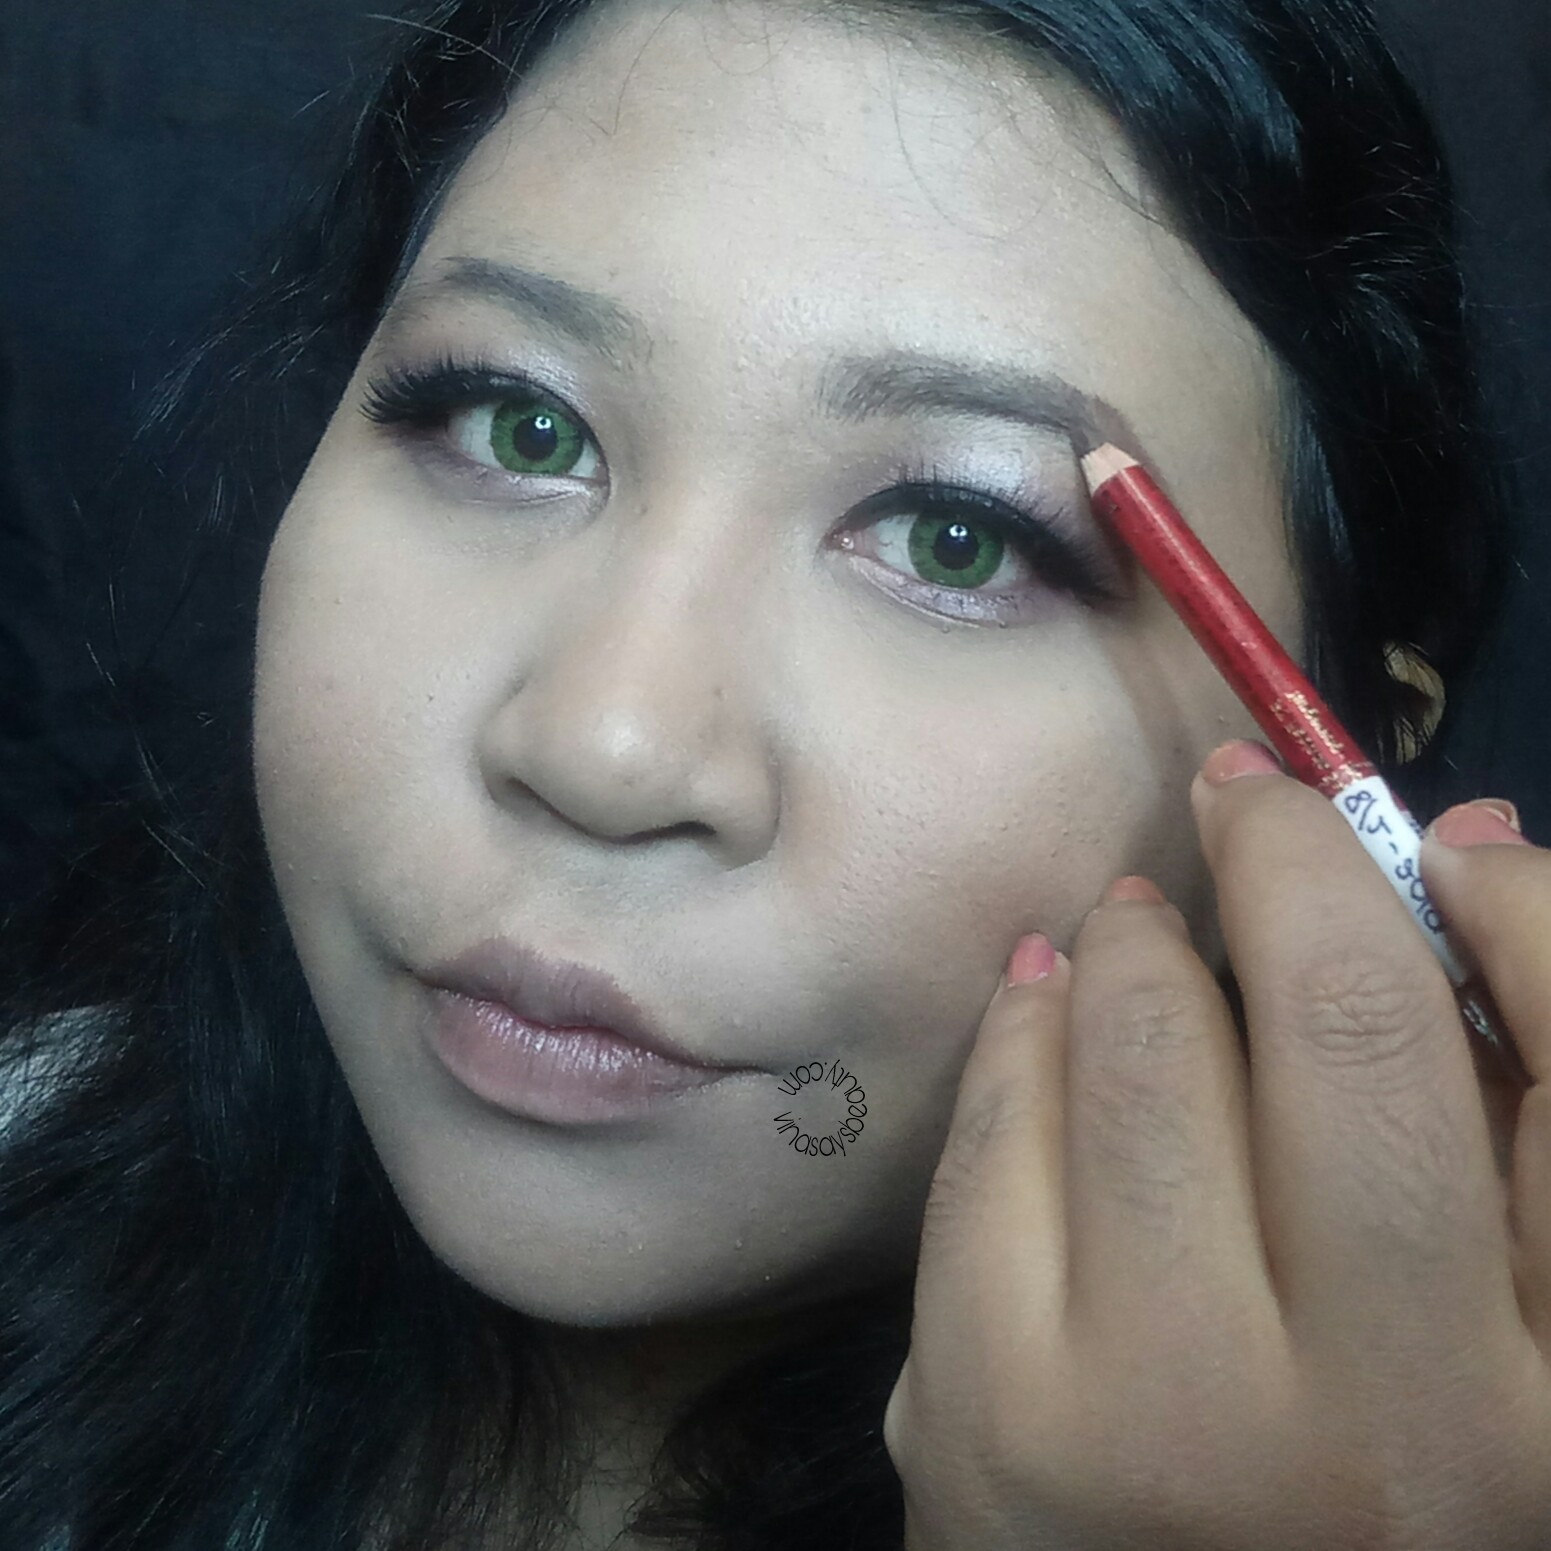 SP TUTORIAL SOFT PARTY MAKE UP LOOK BY FANBO COSMETICS Vina Says